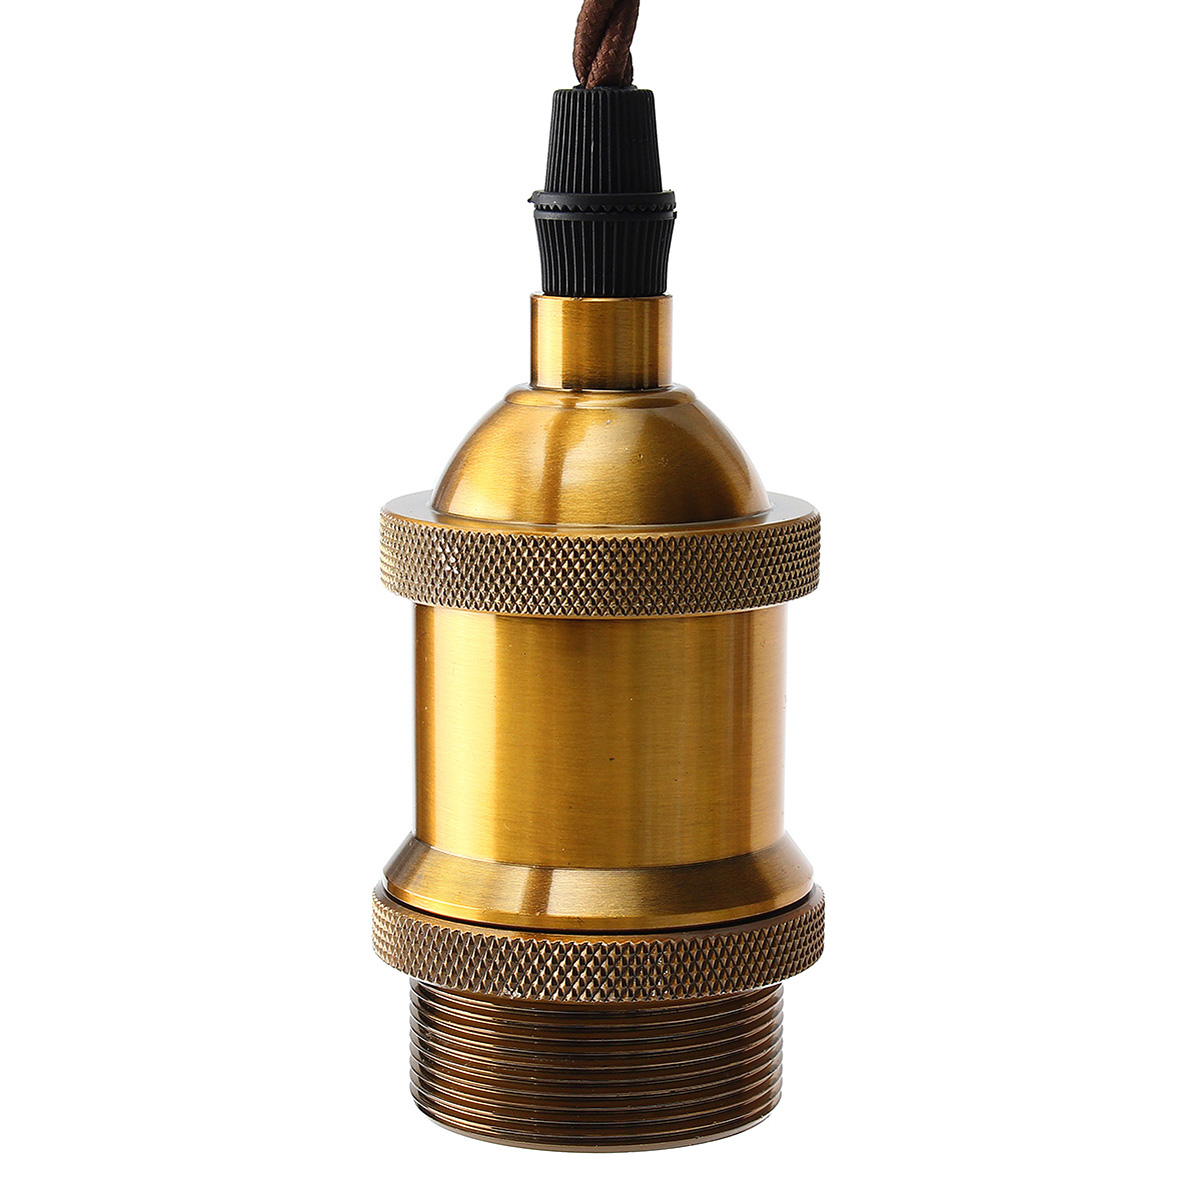 KINGSO-110V-220V-600W-Vintage-Lamp-Holder-Ceiling-Canopy-and-Copper-Socket-with-2M-Wire-1894180-7